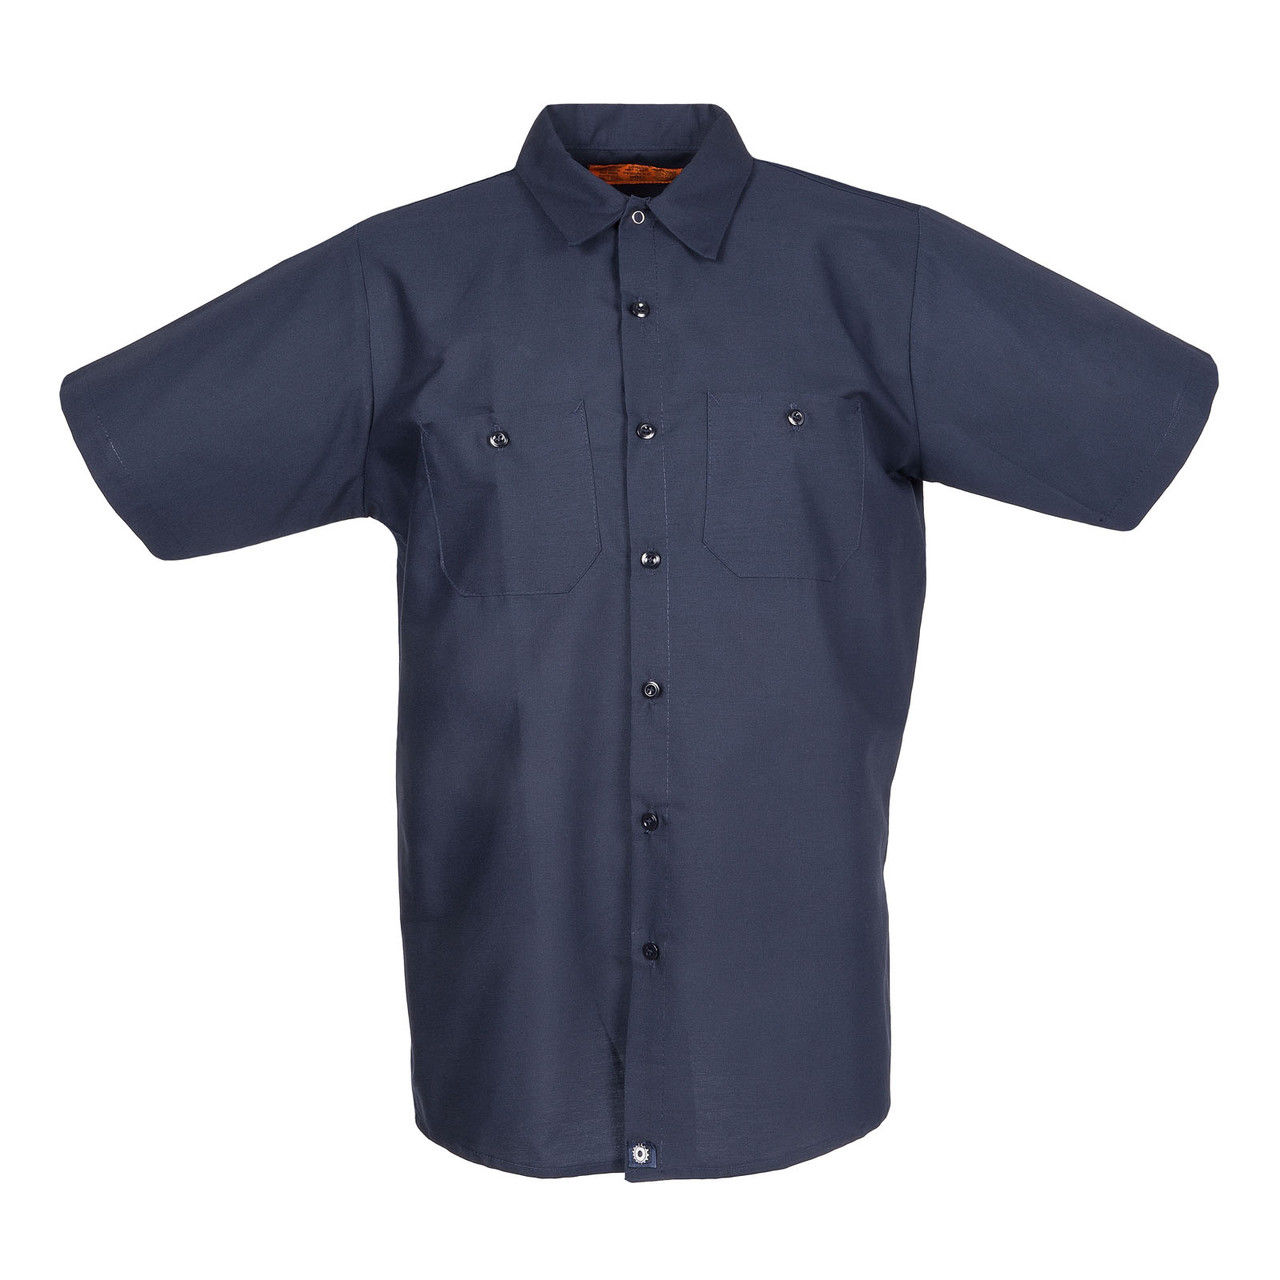 What are the material and size range for the men's navy blue short sleeve shirt S12NV?